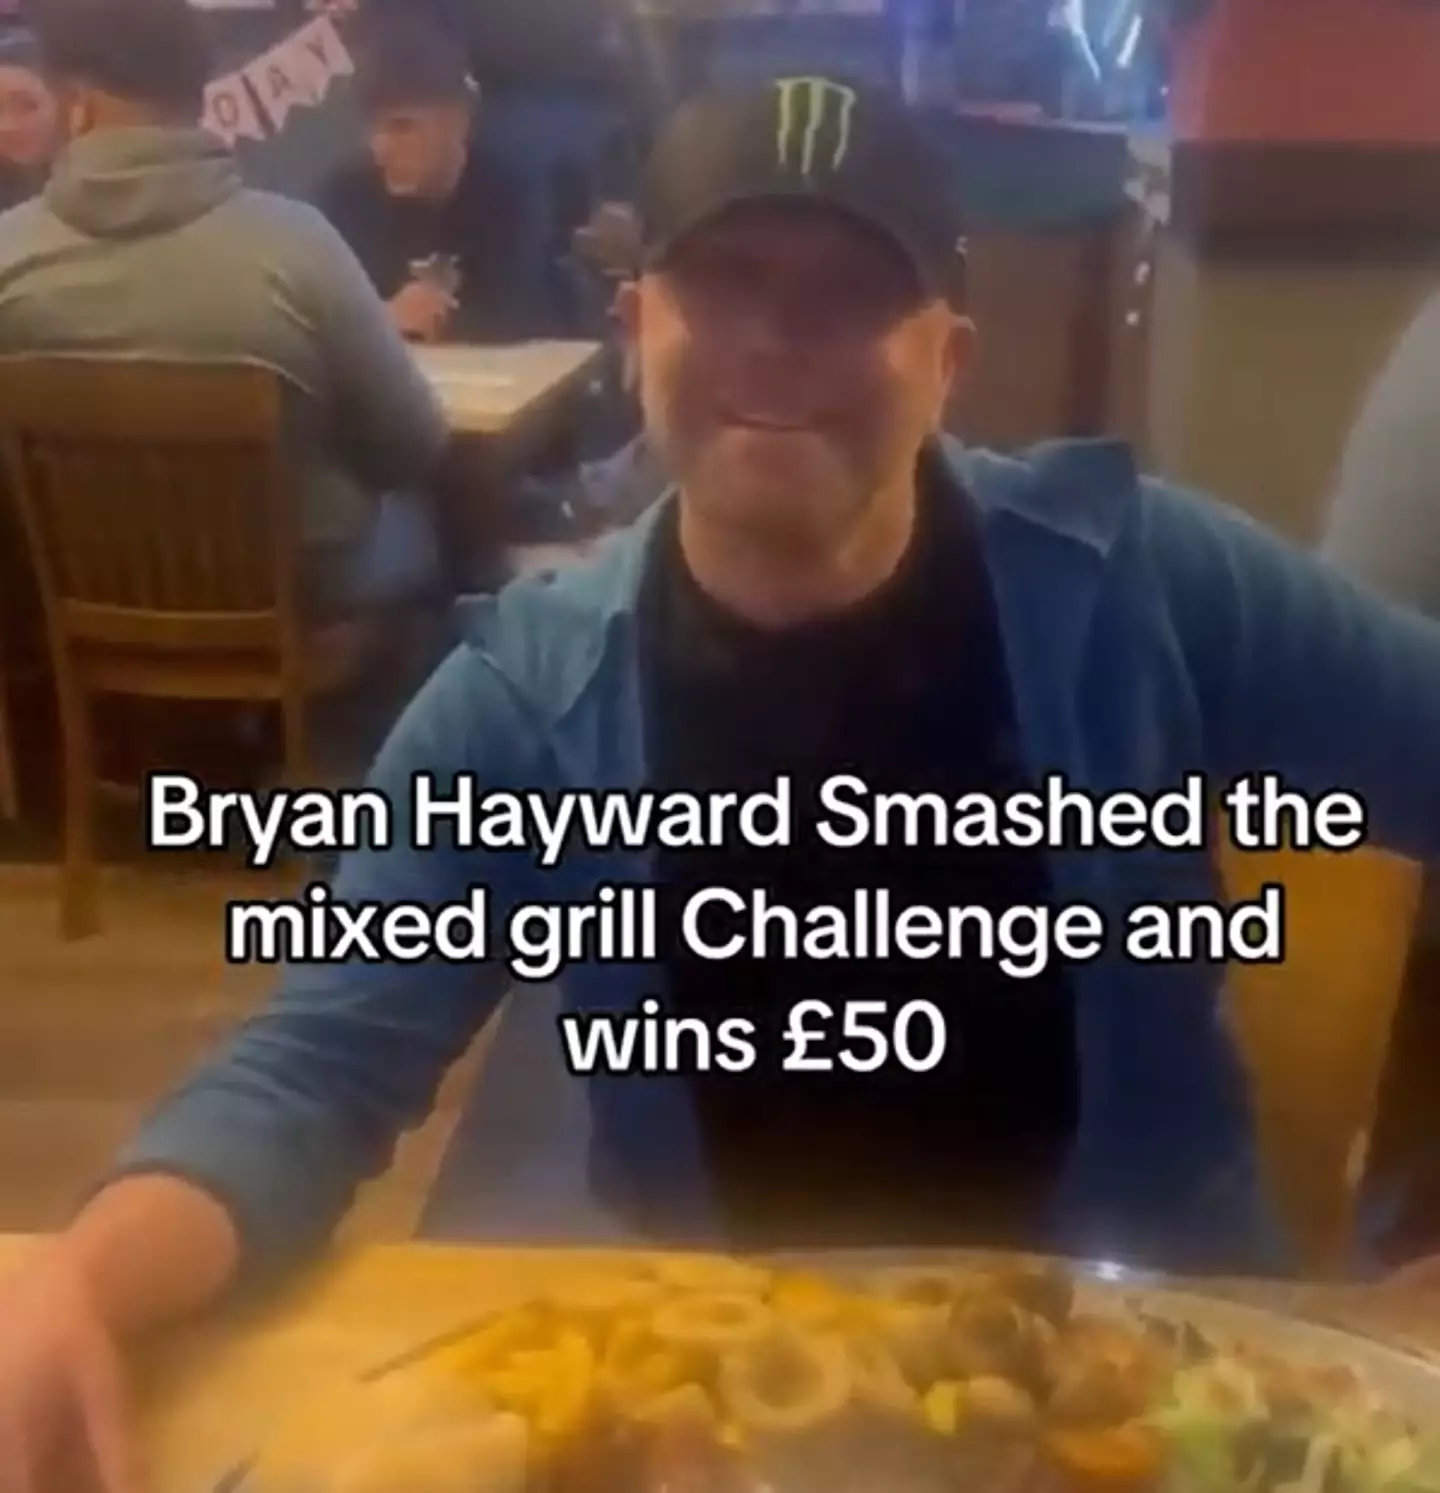 Brian vs mixed grill, there was only ever going to be one winner.